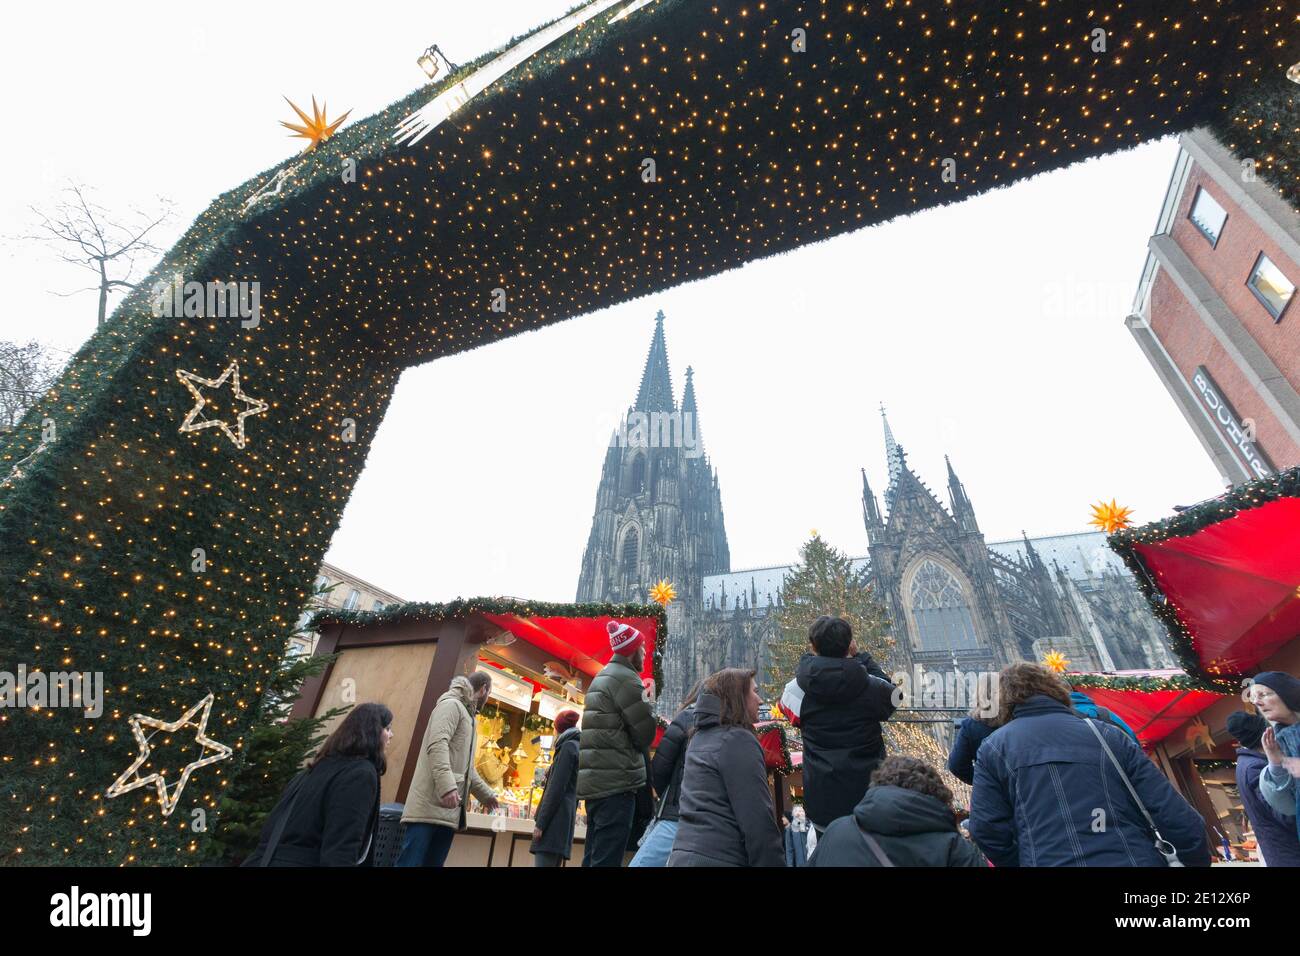 Entrance to the Christmas Market, or Weihnachtsmarkt  at the Cologne Cathedral. Stock Photo